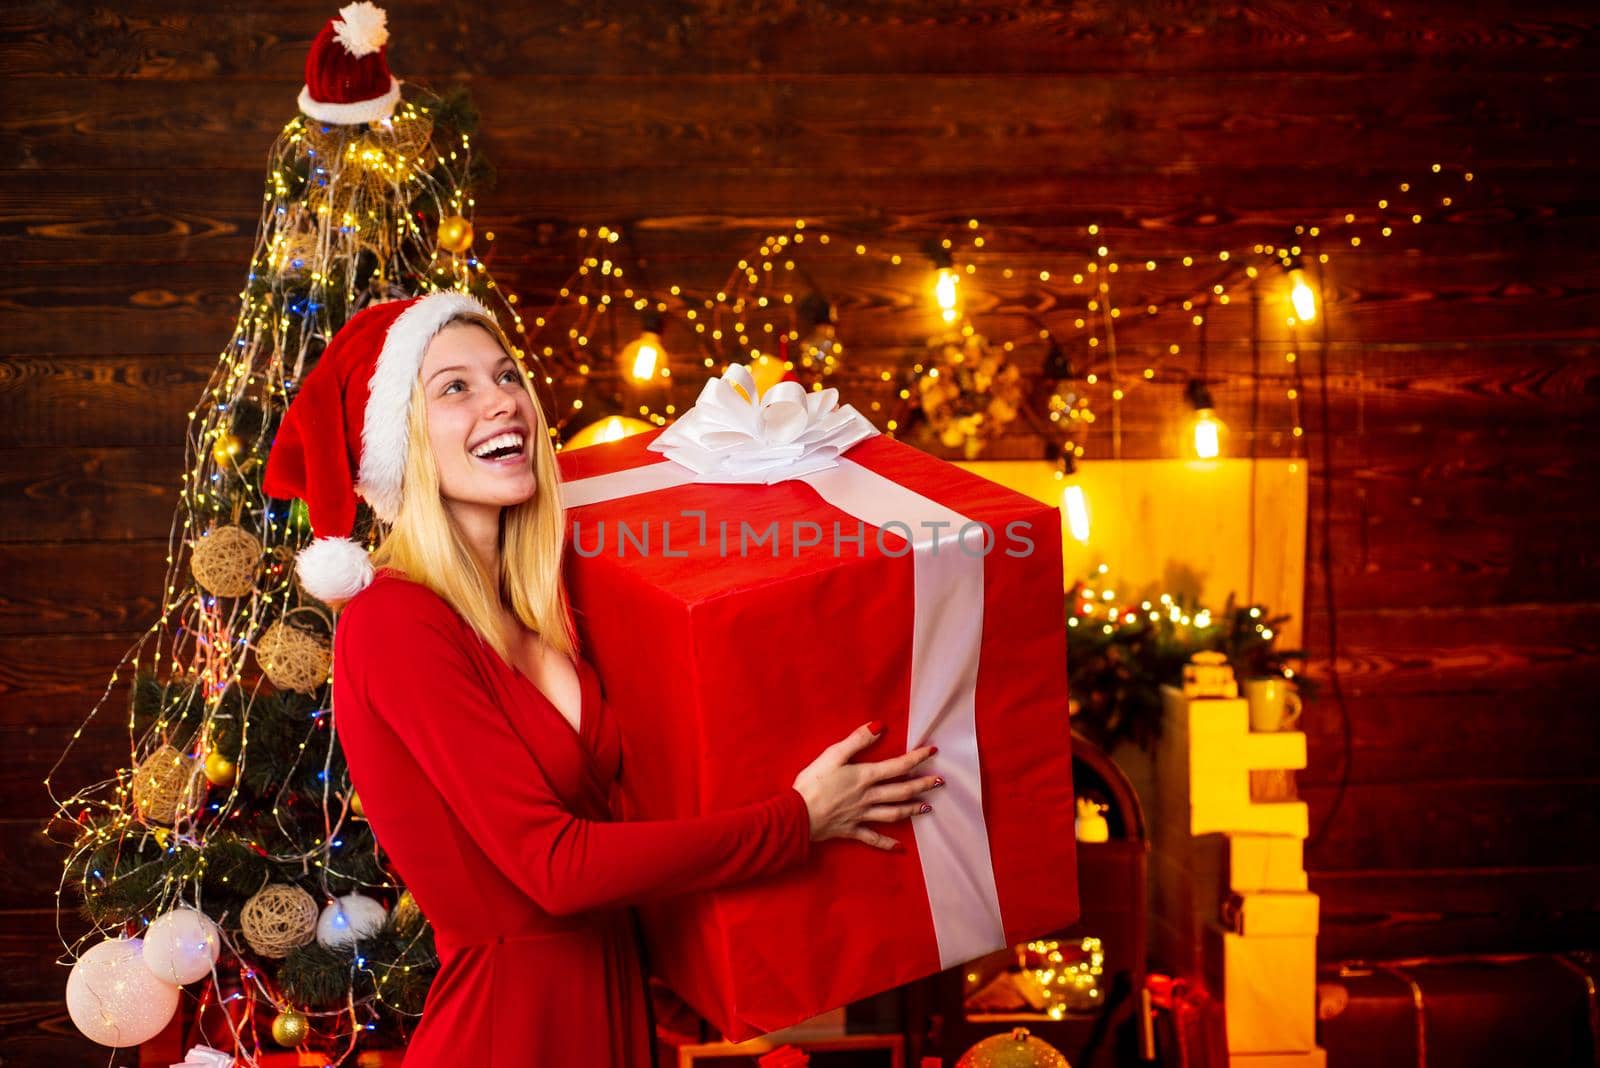 Woman with Christmas mood. Young woman in elegant red dress over Christmas interior background. Luxury Christmas woman. Christmas and new year holidays